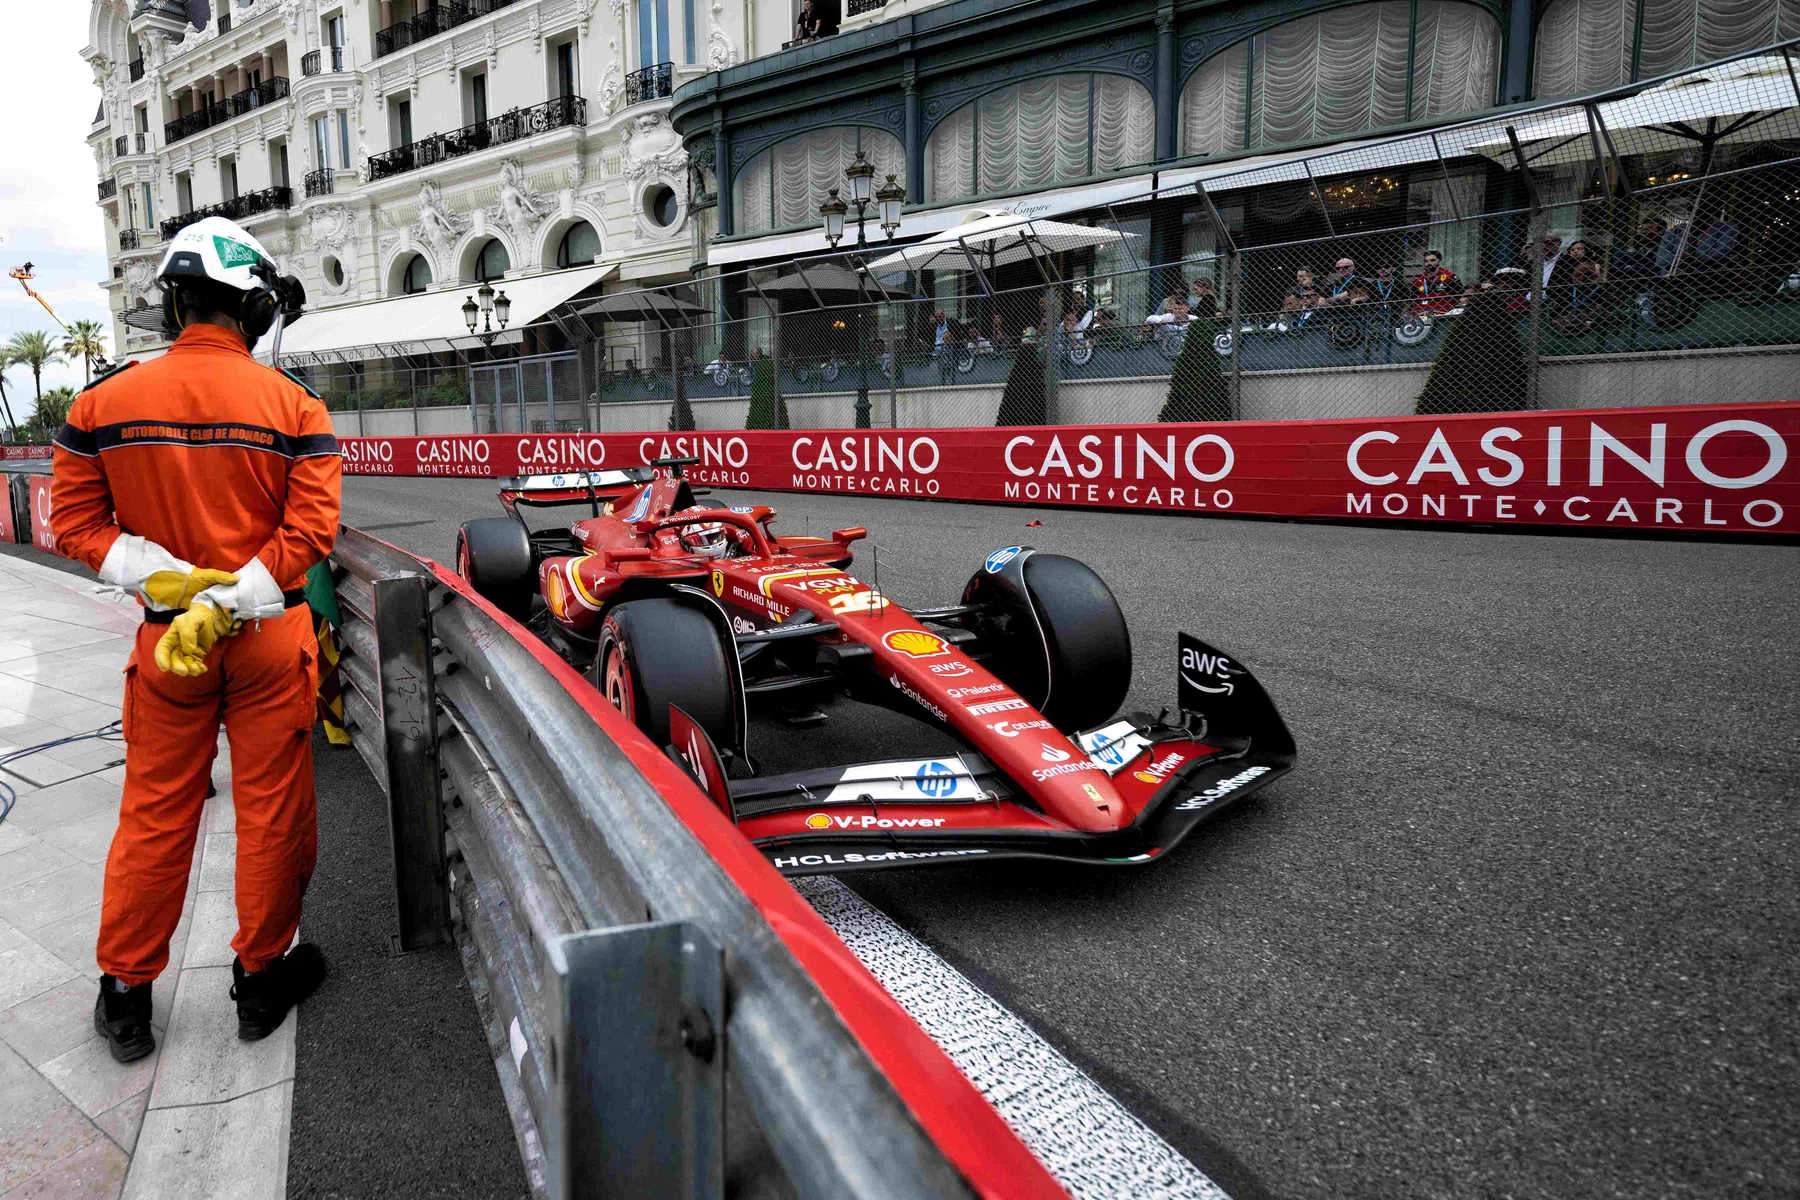 leclerc still waiting for first podium finish in monaco